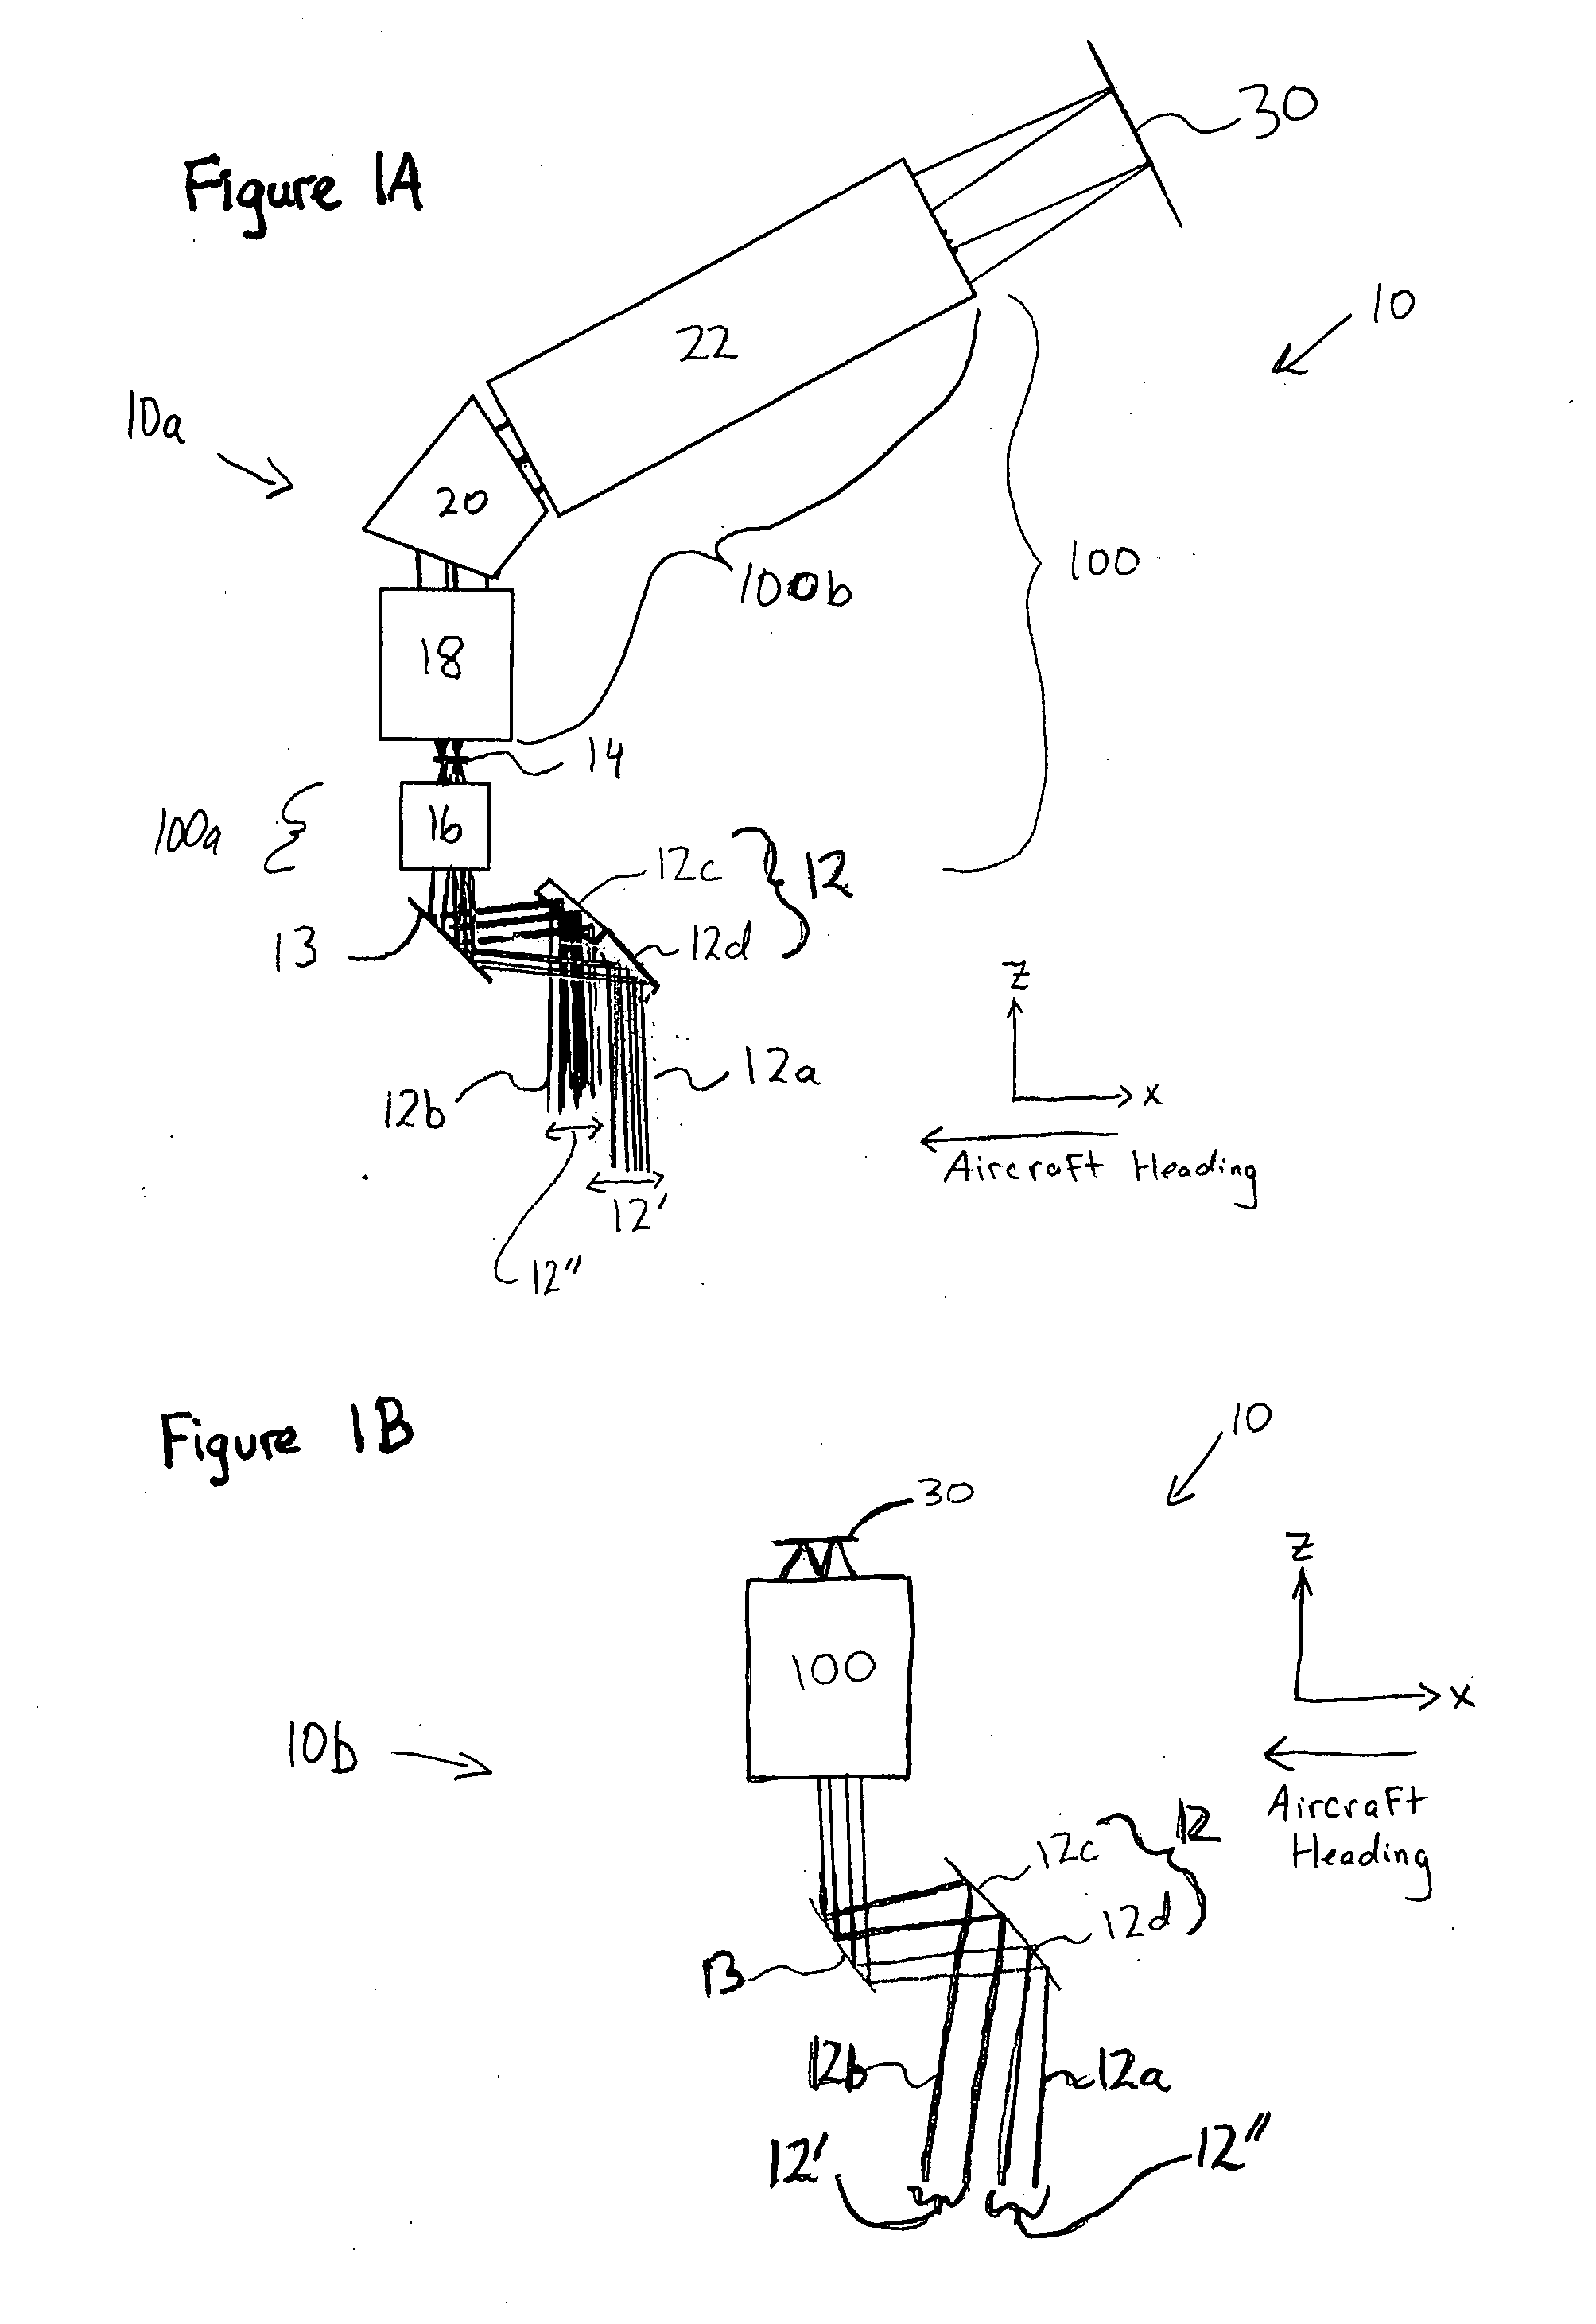 Optically multiplexed imaging system and methods of operation